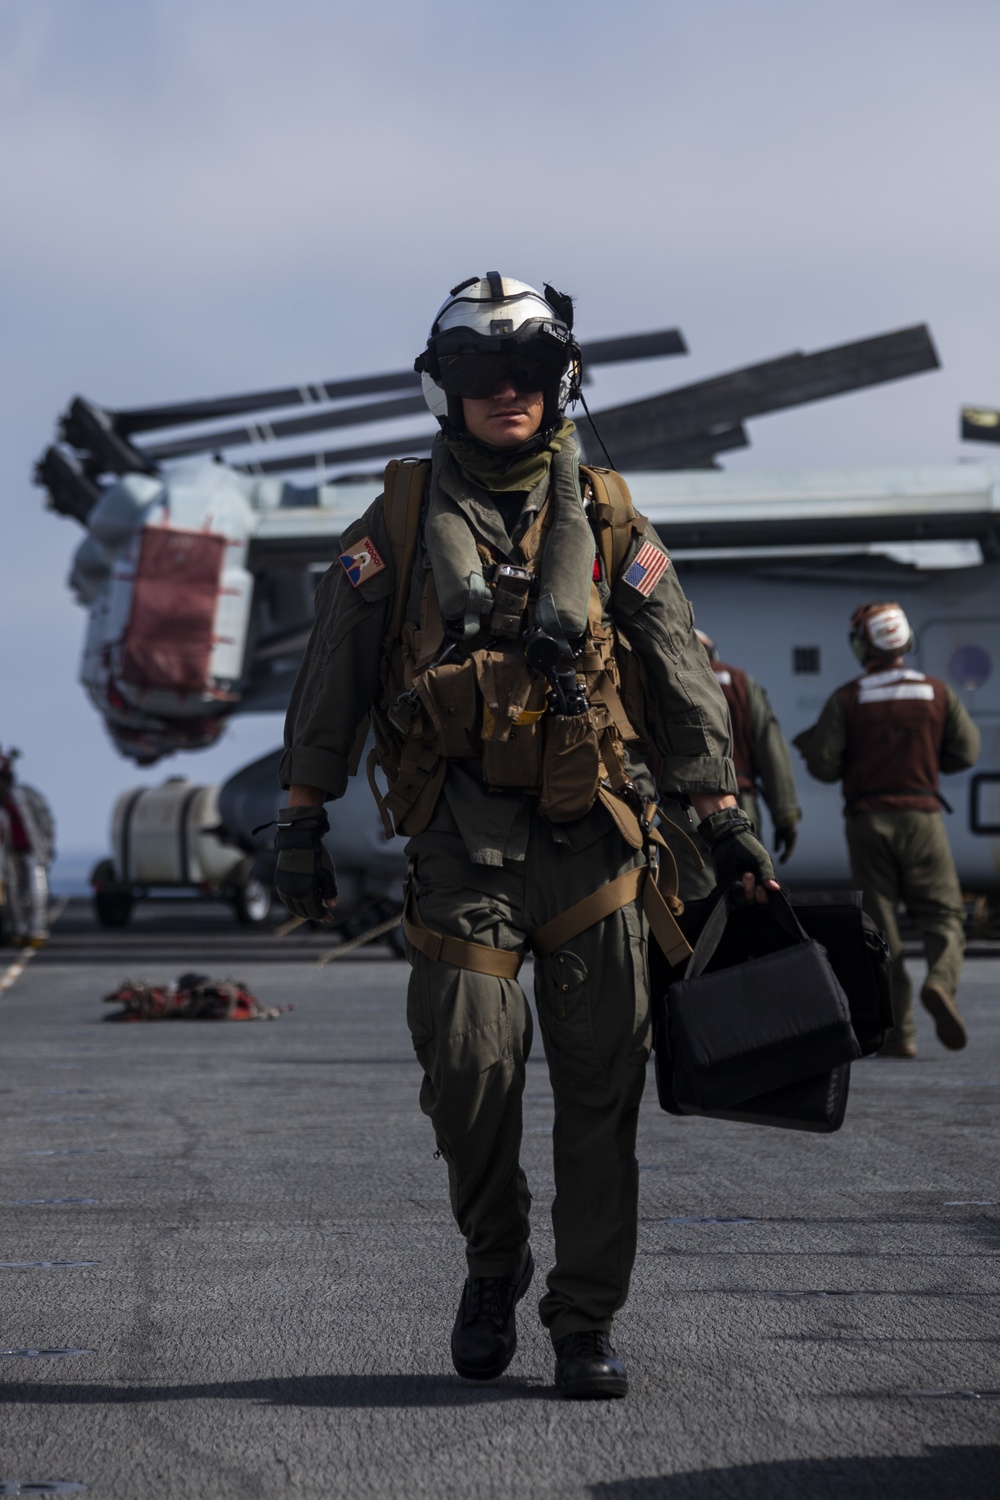 15th MEU, USS Makin Island conduct search and rescue operations